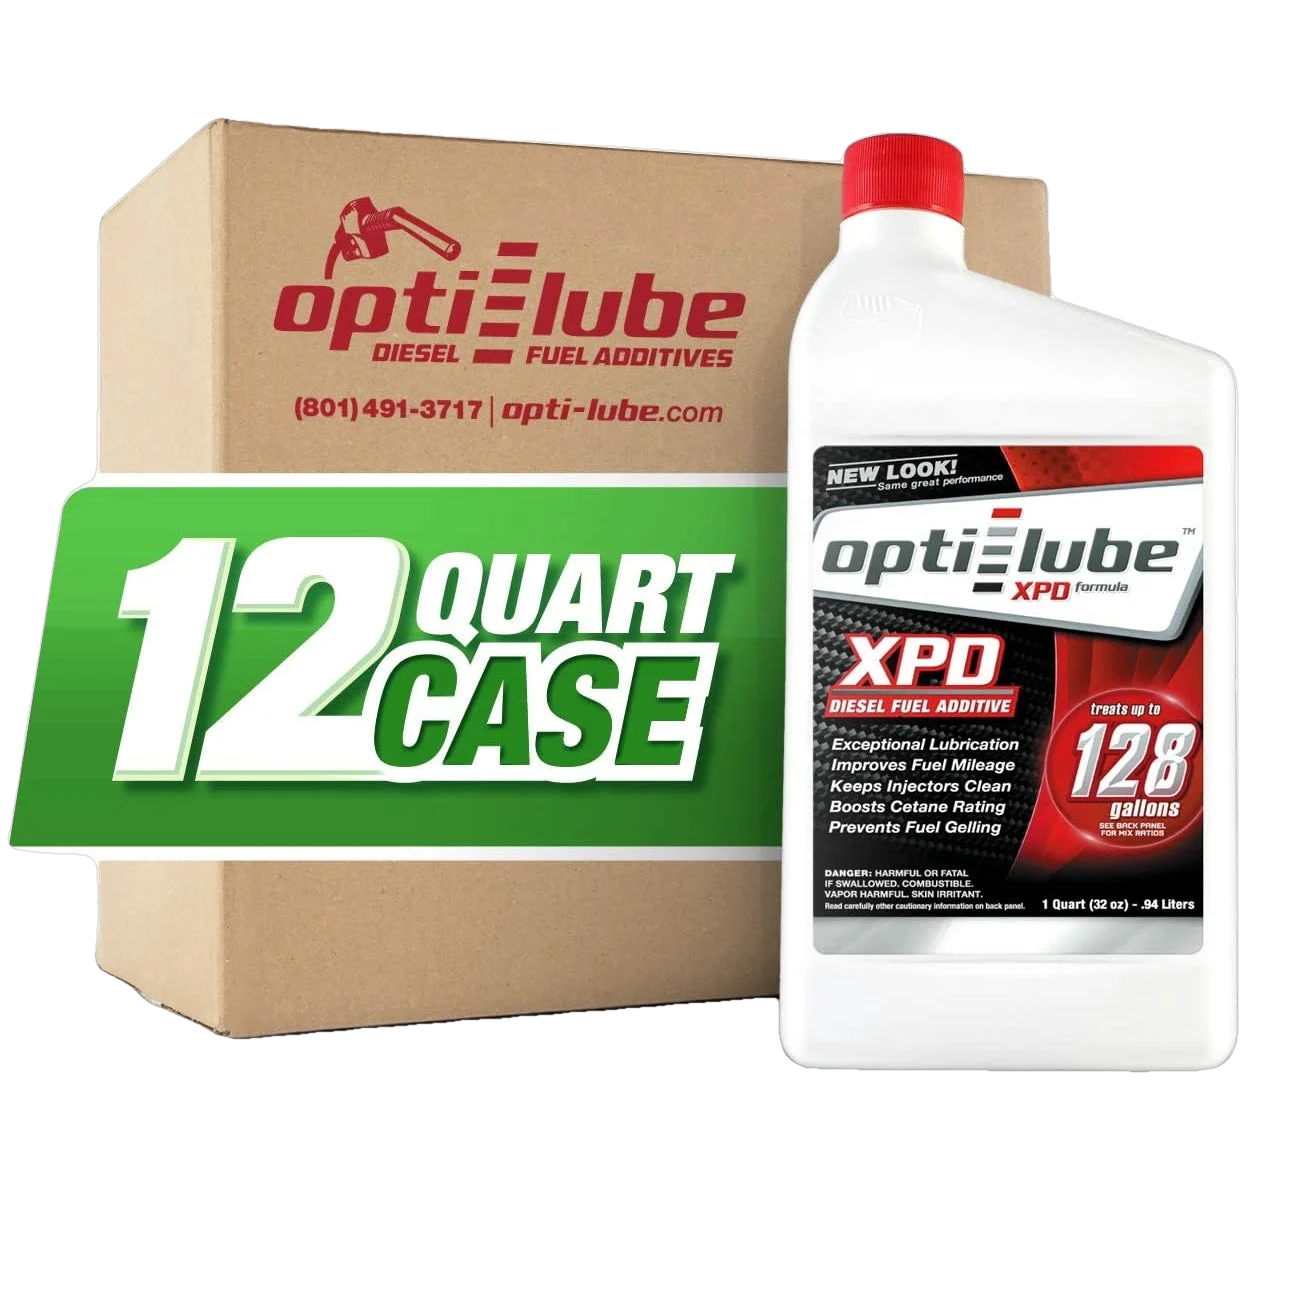 Opti-Lube XPD All-In-One Diesel Fuel Additive: Case of 12 Quarts, 1 Quart Treats up to 128 Gallons